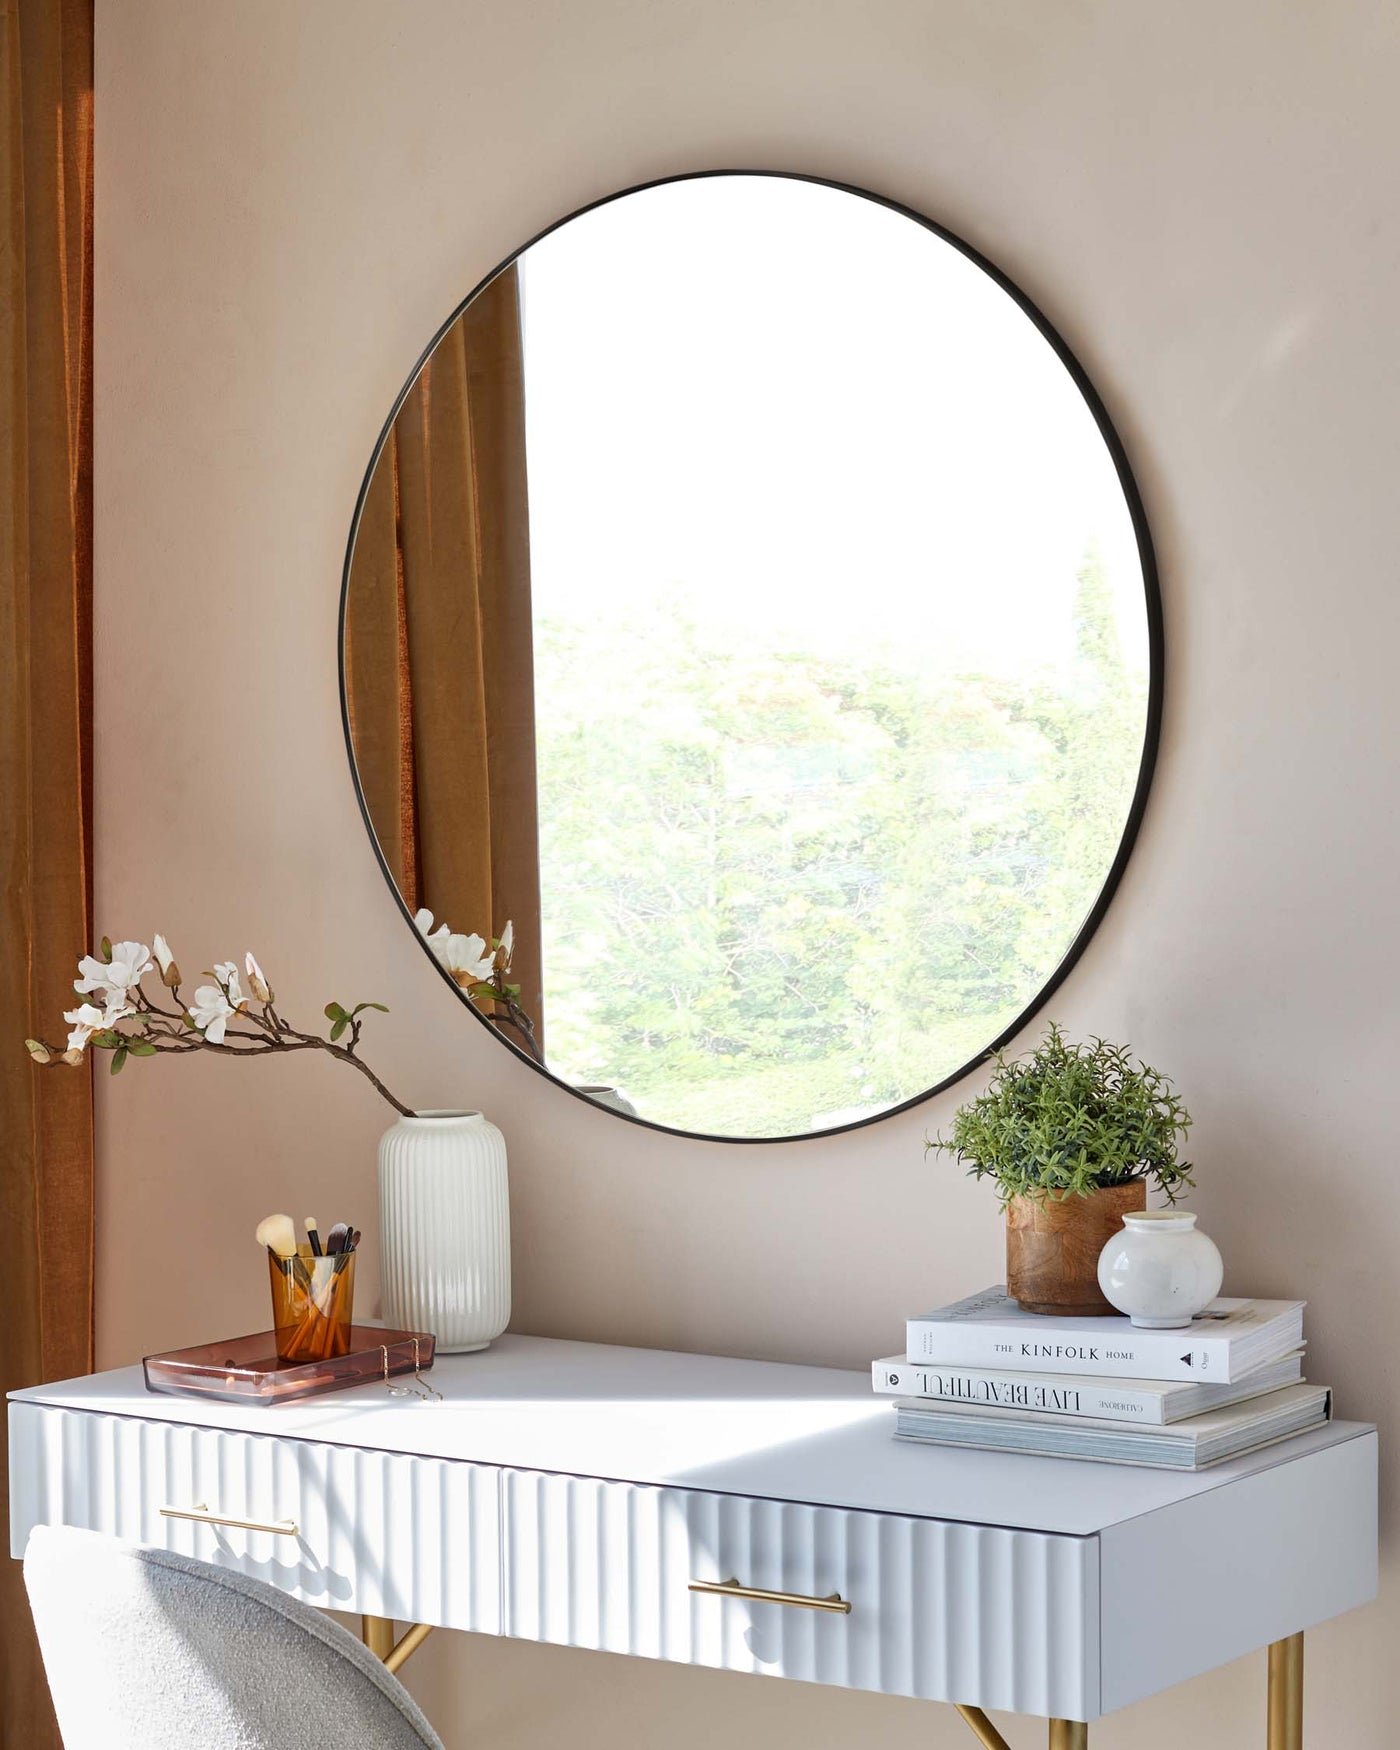 A modern white console table with fluted drawer fronts and brass handles, set against a light earth-toned wall with a large round mirror above it.